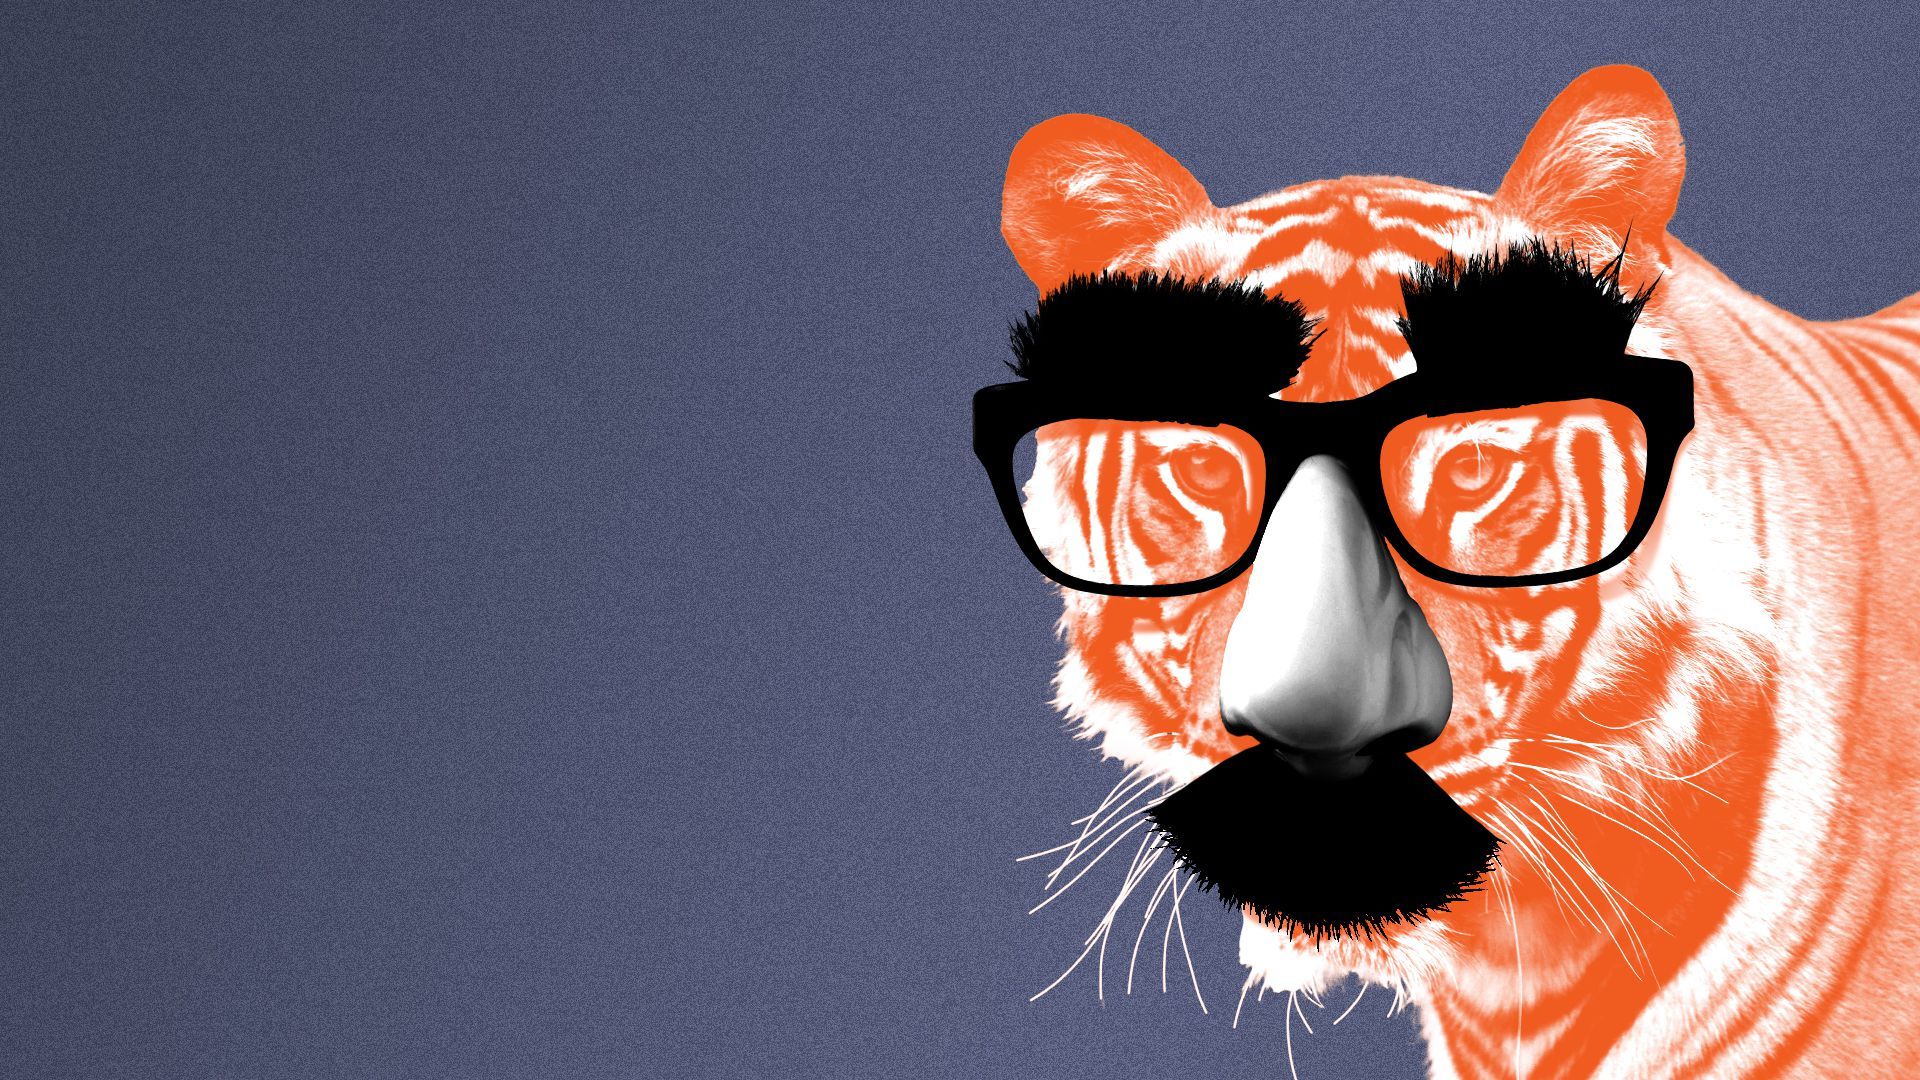 Illustration of a tiger wearing a Groucho Marx-style glasses, nose, and mustache disguise.